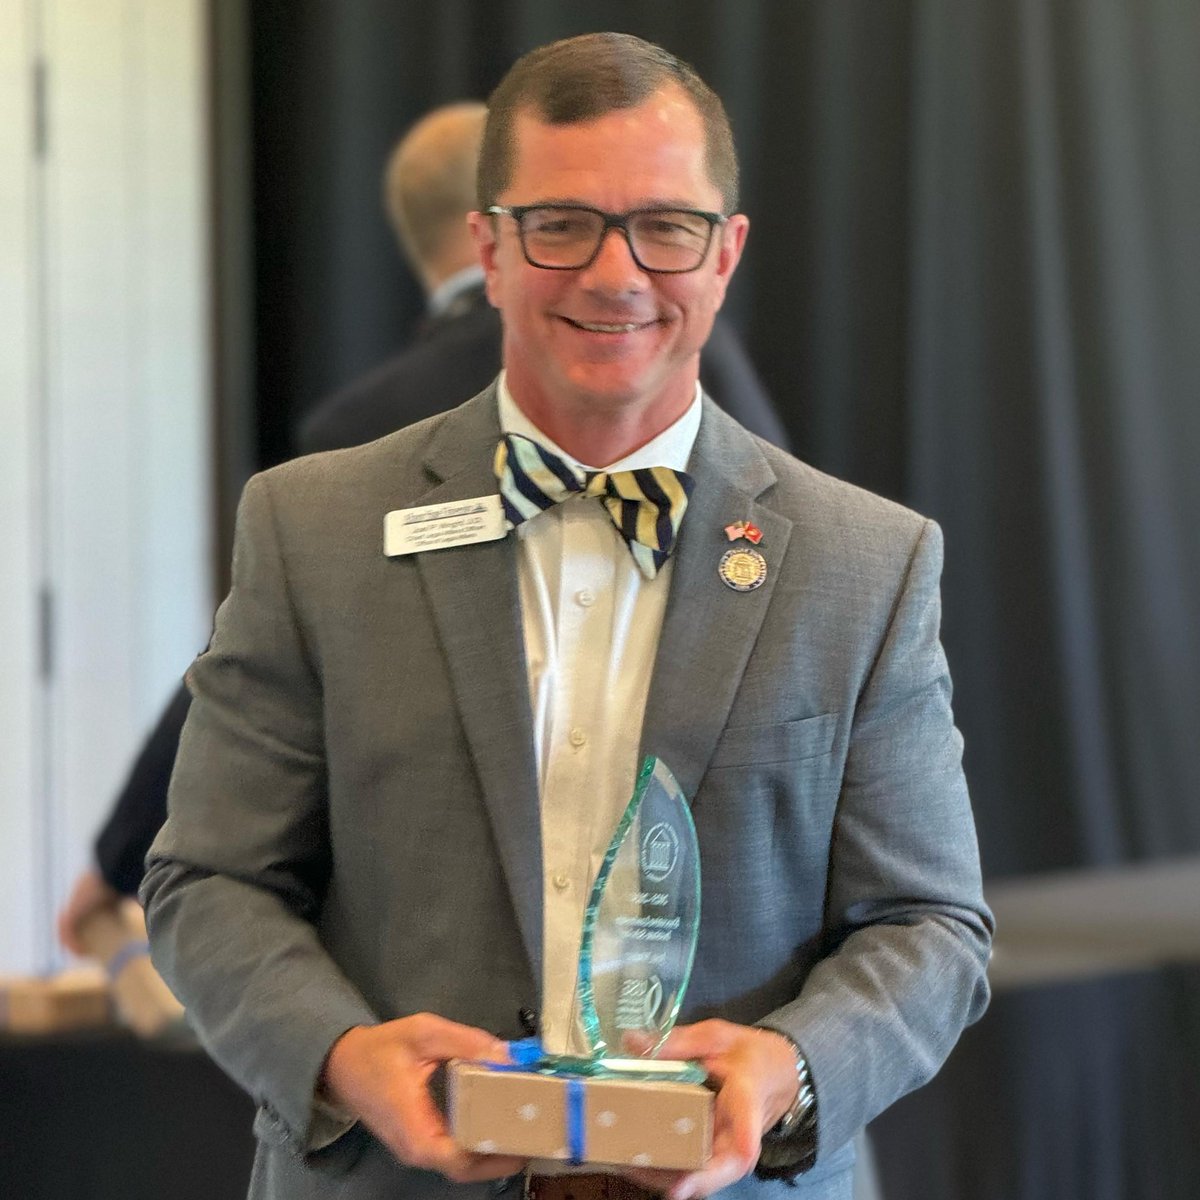 Congratulations to Joel Wright, #AlbanyState Chief Legal Affairs Officer, for completing the University System of Georgia Executive Leadership Institute!